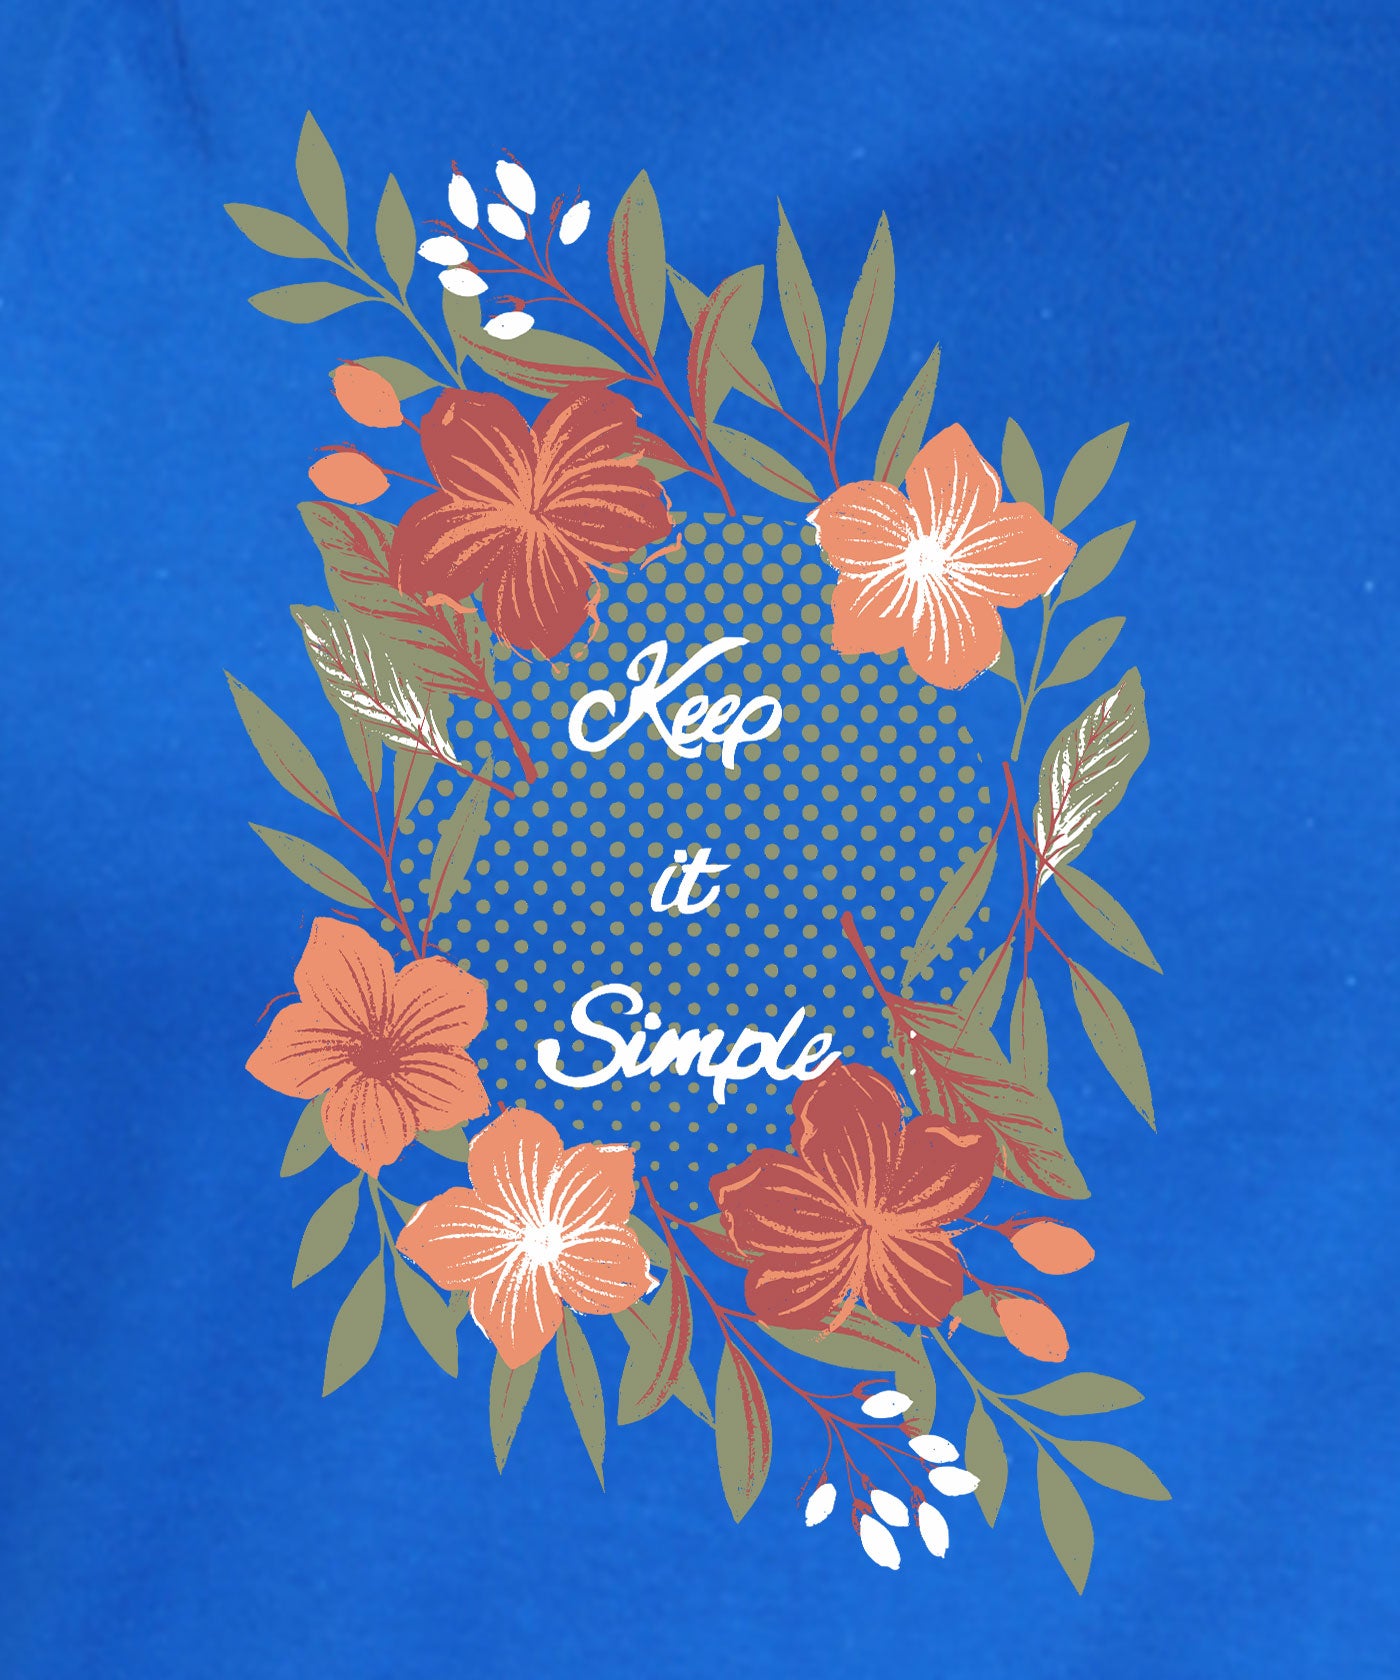 Keep it Simple - Premium Round Neck Cotton Tees for Women - Electric Blue